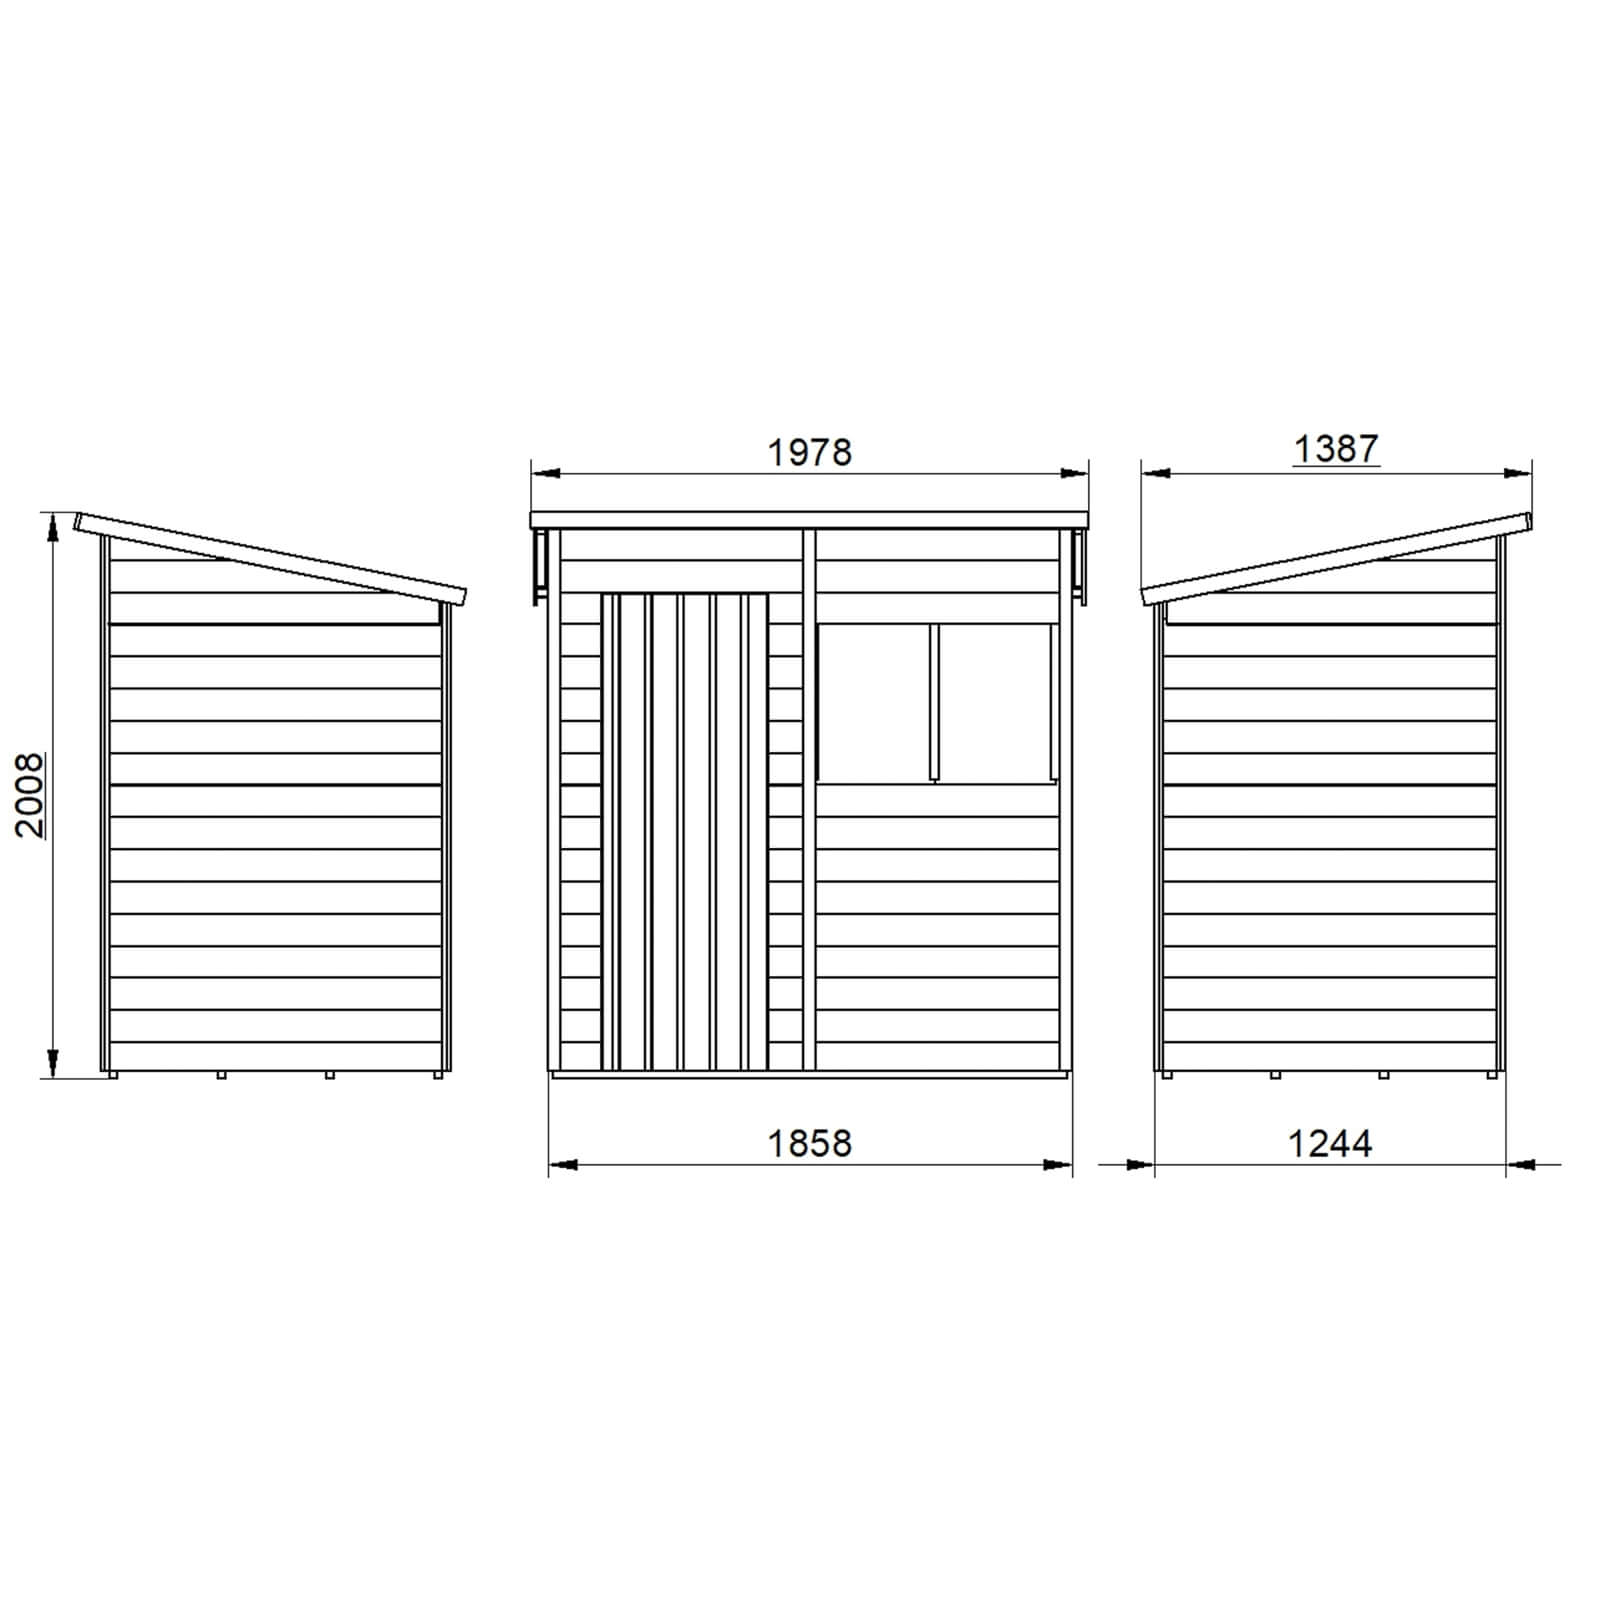 Forest 6 x 4ft Overlap Pressure Treated Pent Shed -incl. Installation